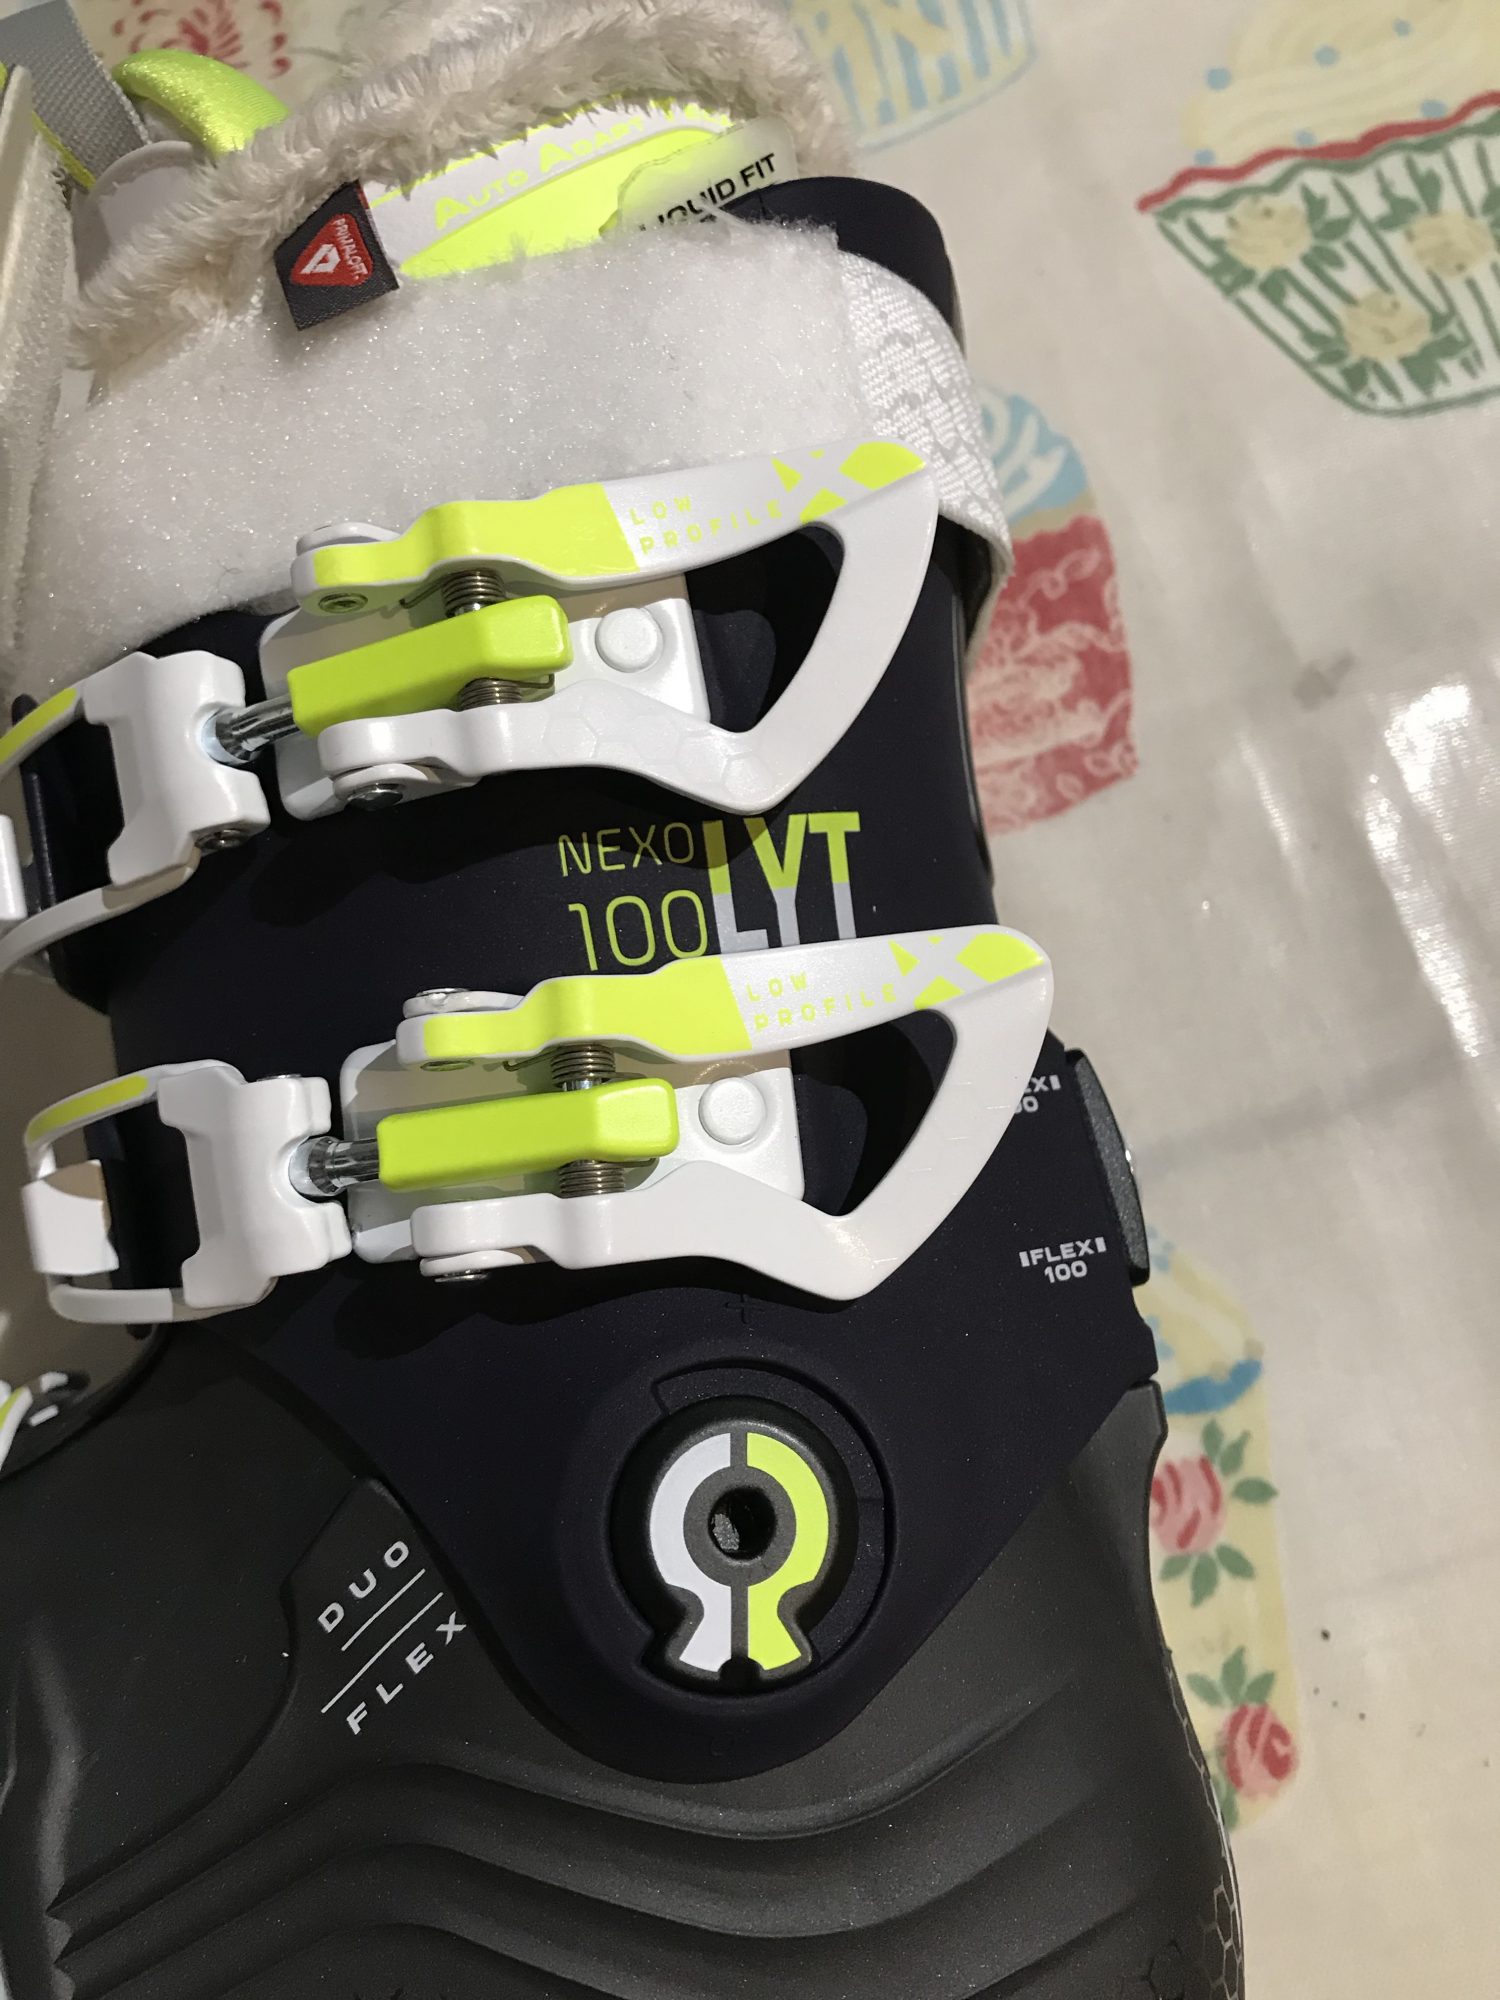 Review on the Head Nexo Lyt 100 W G Ski Boots 2019.